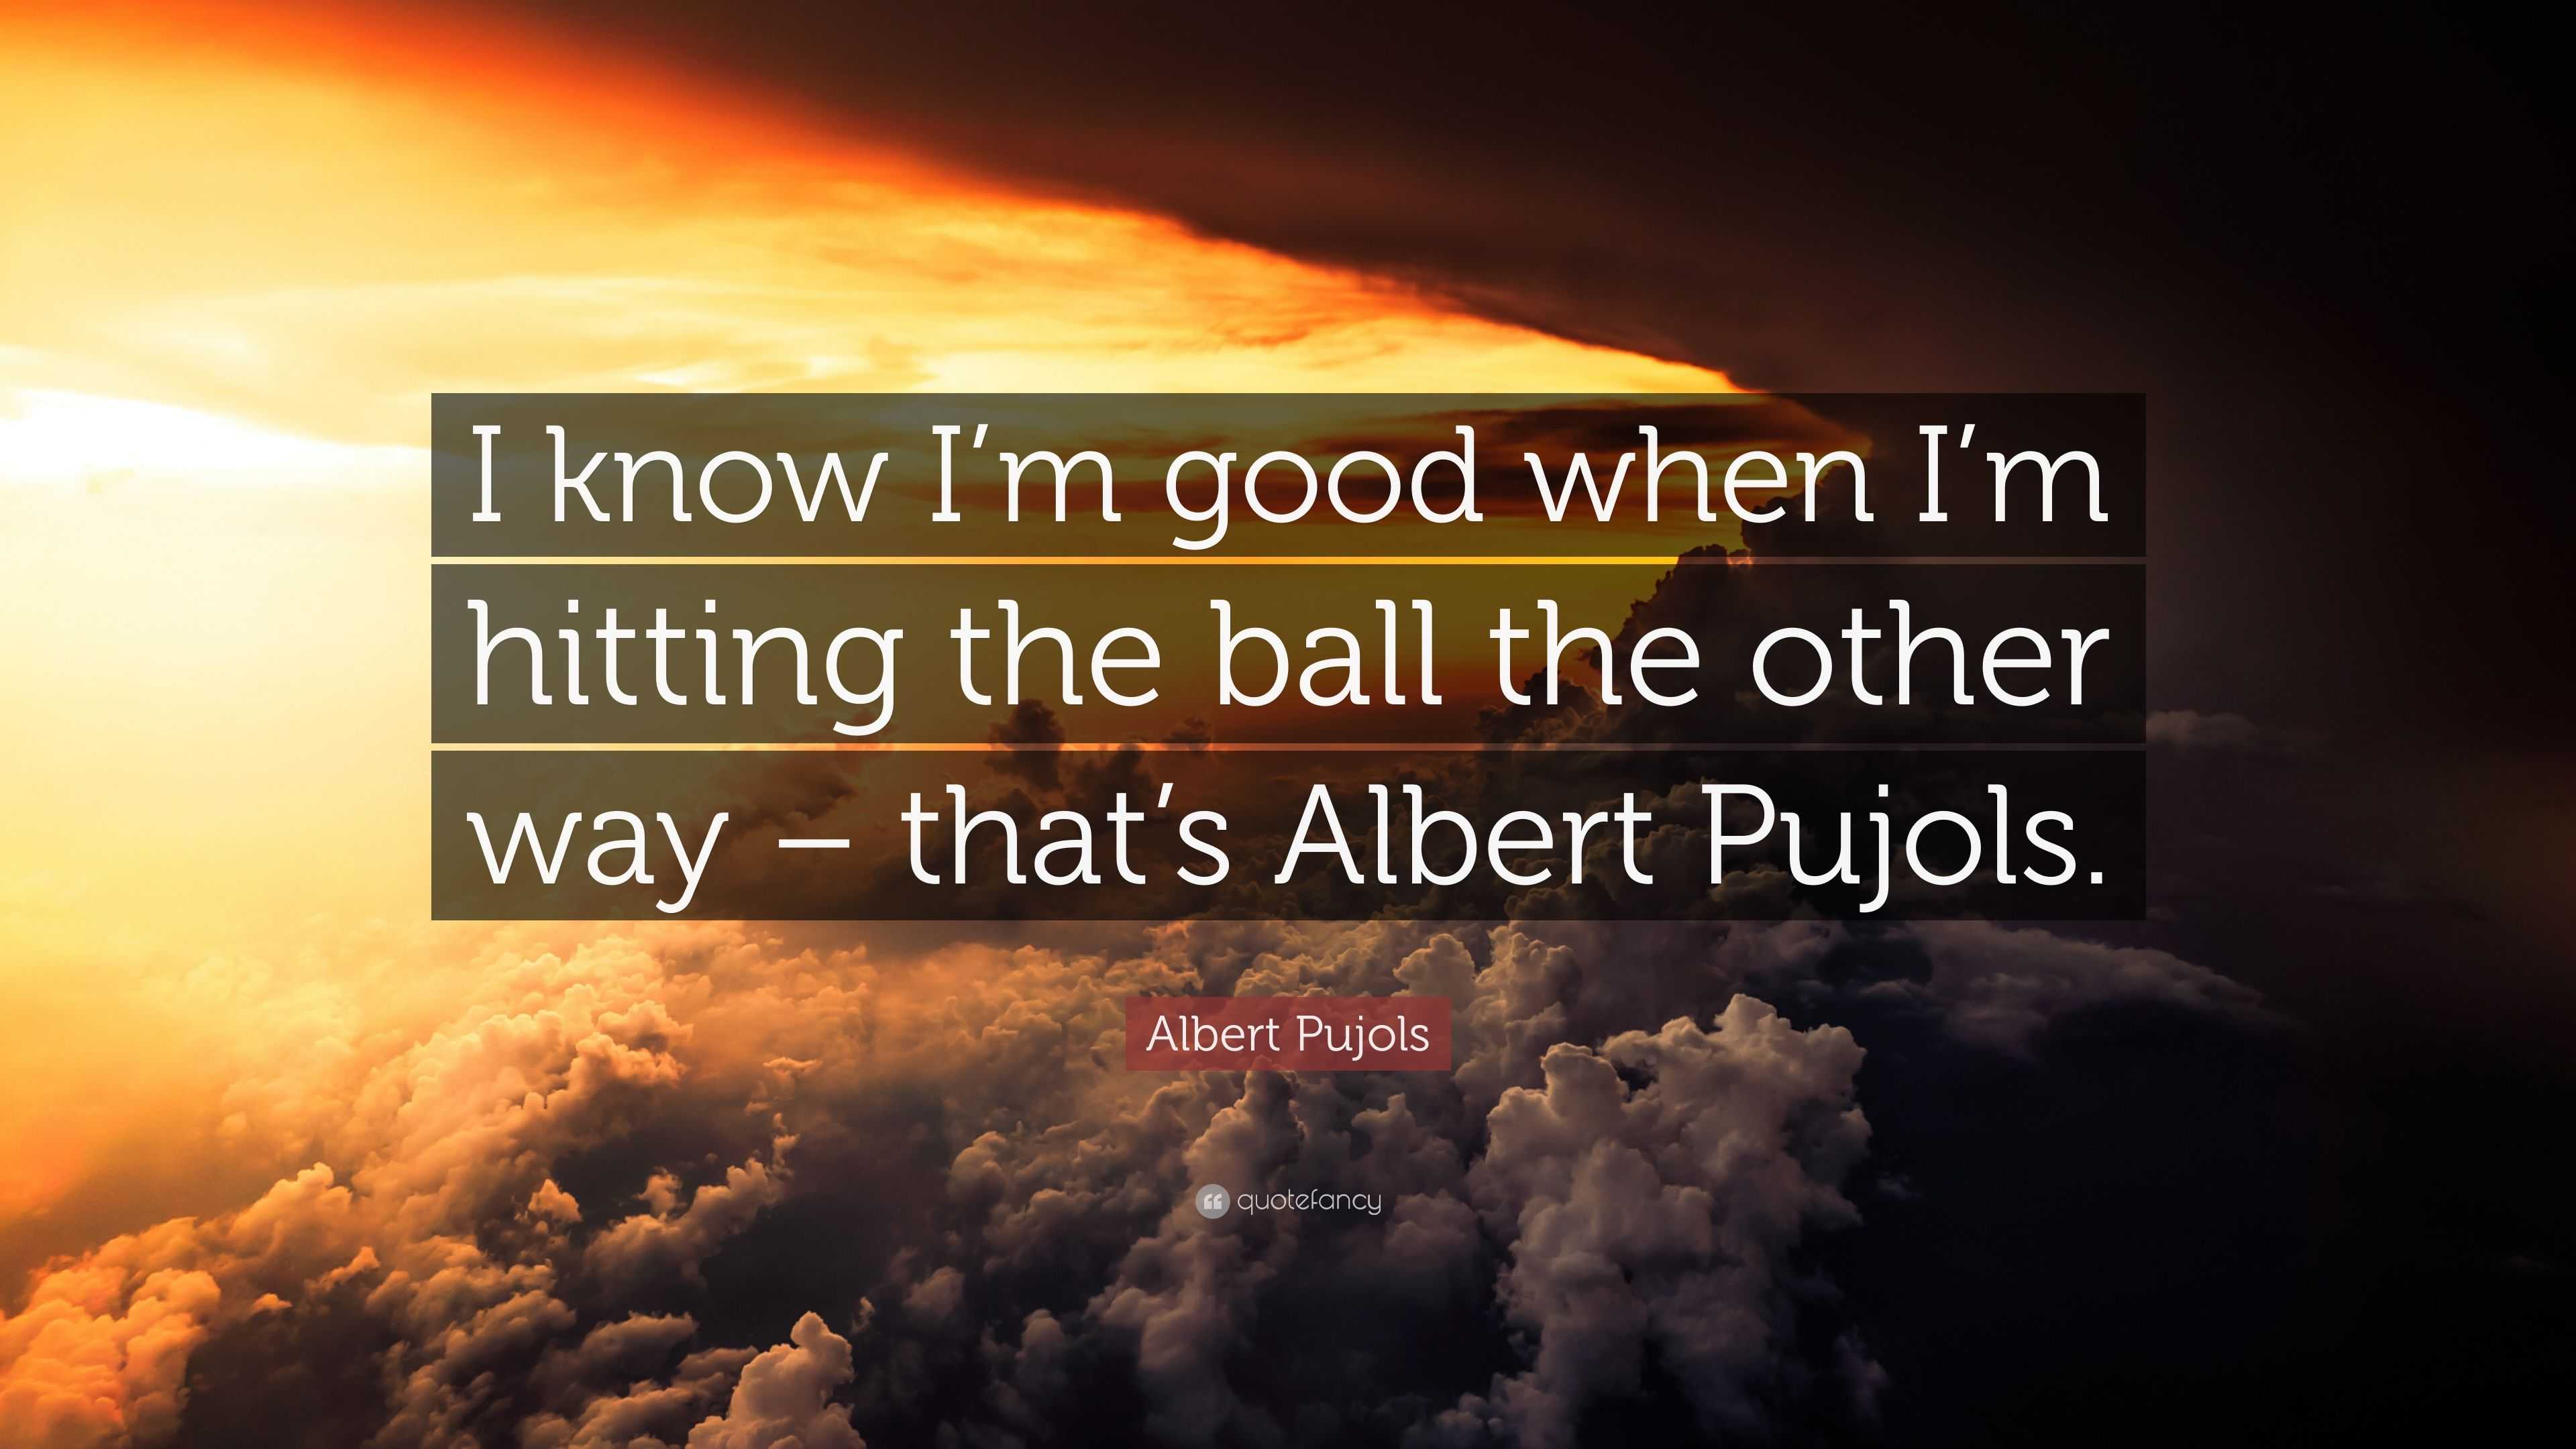 Albert Pujols Quote: “I know I'm good when I'm hitting the ball the other